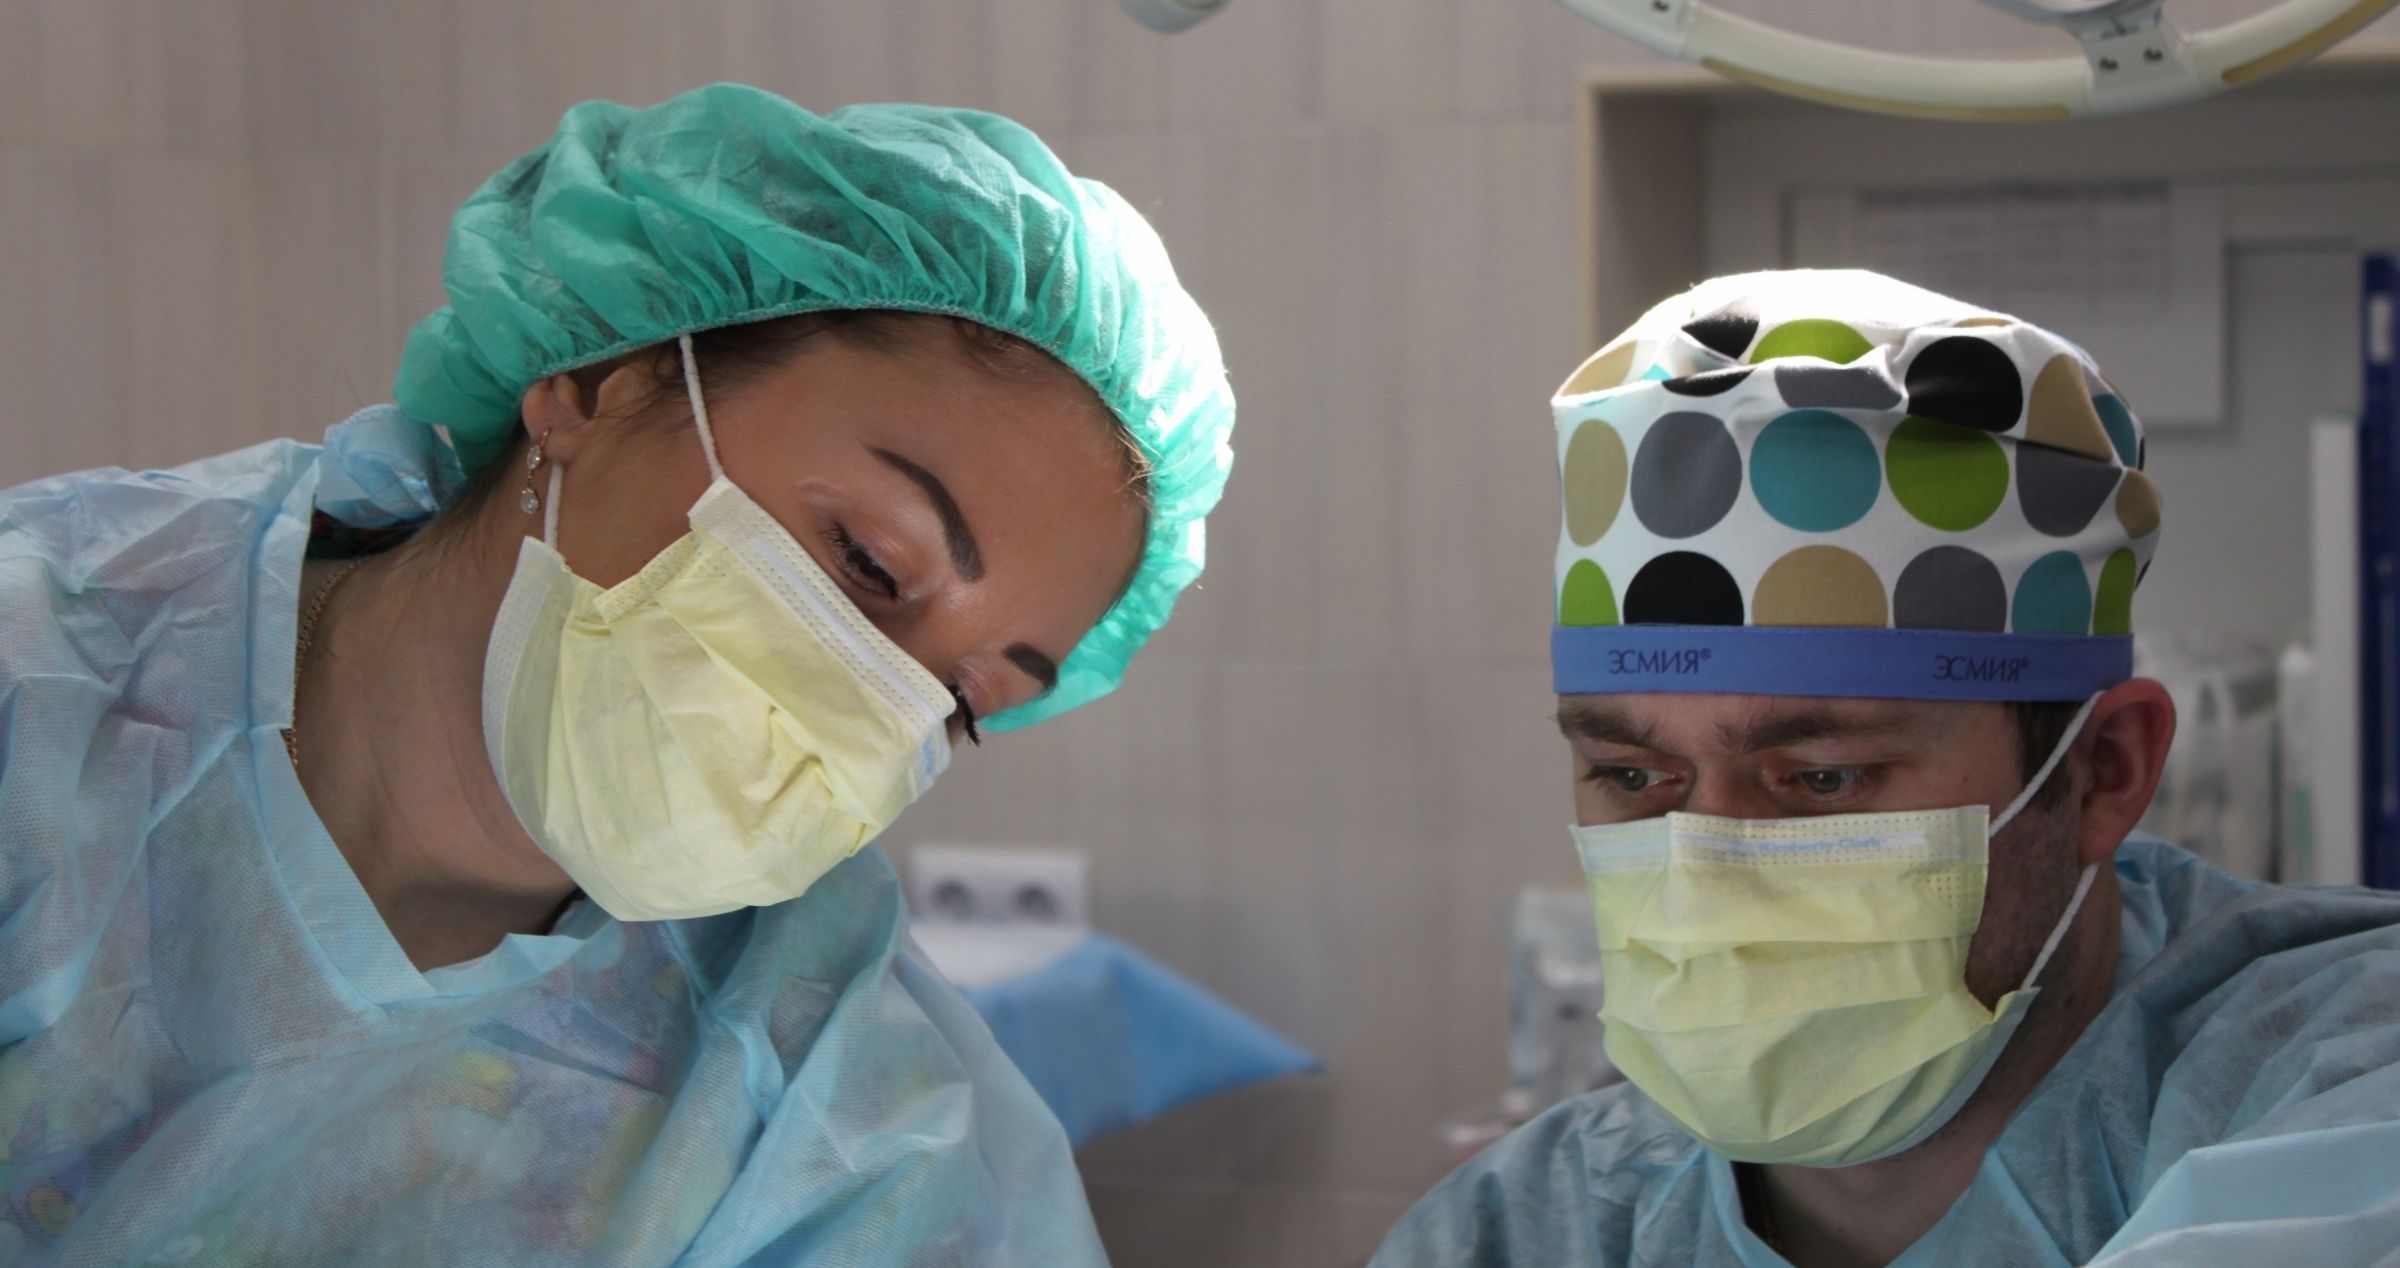 Two surgeons wearing masks and scrubs in operating theatre